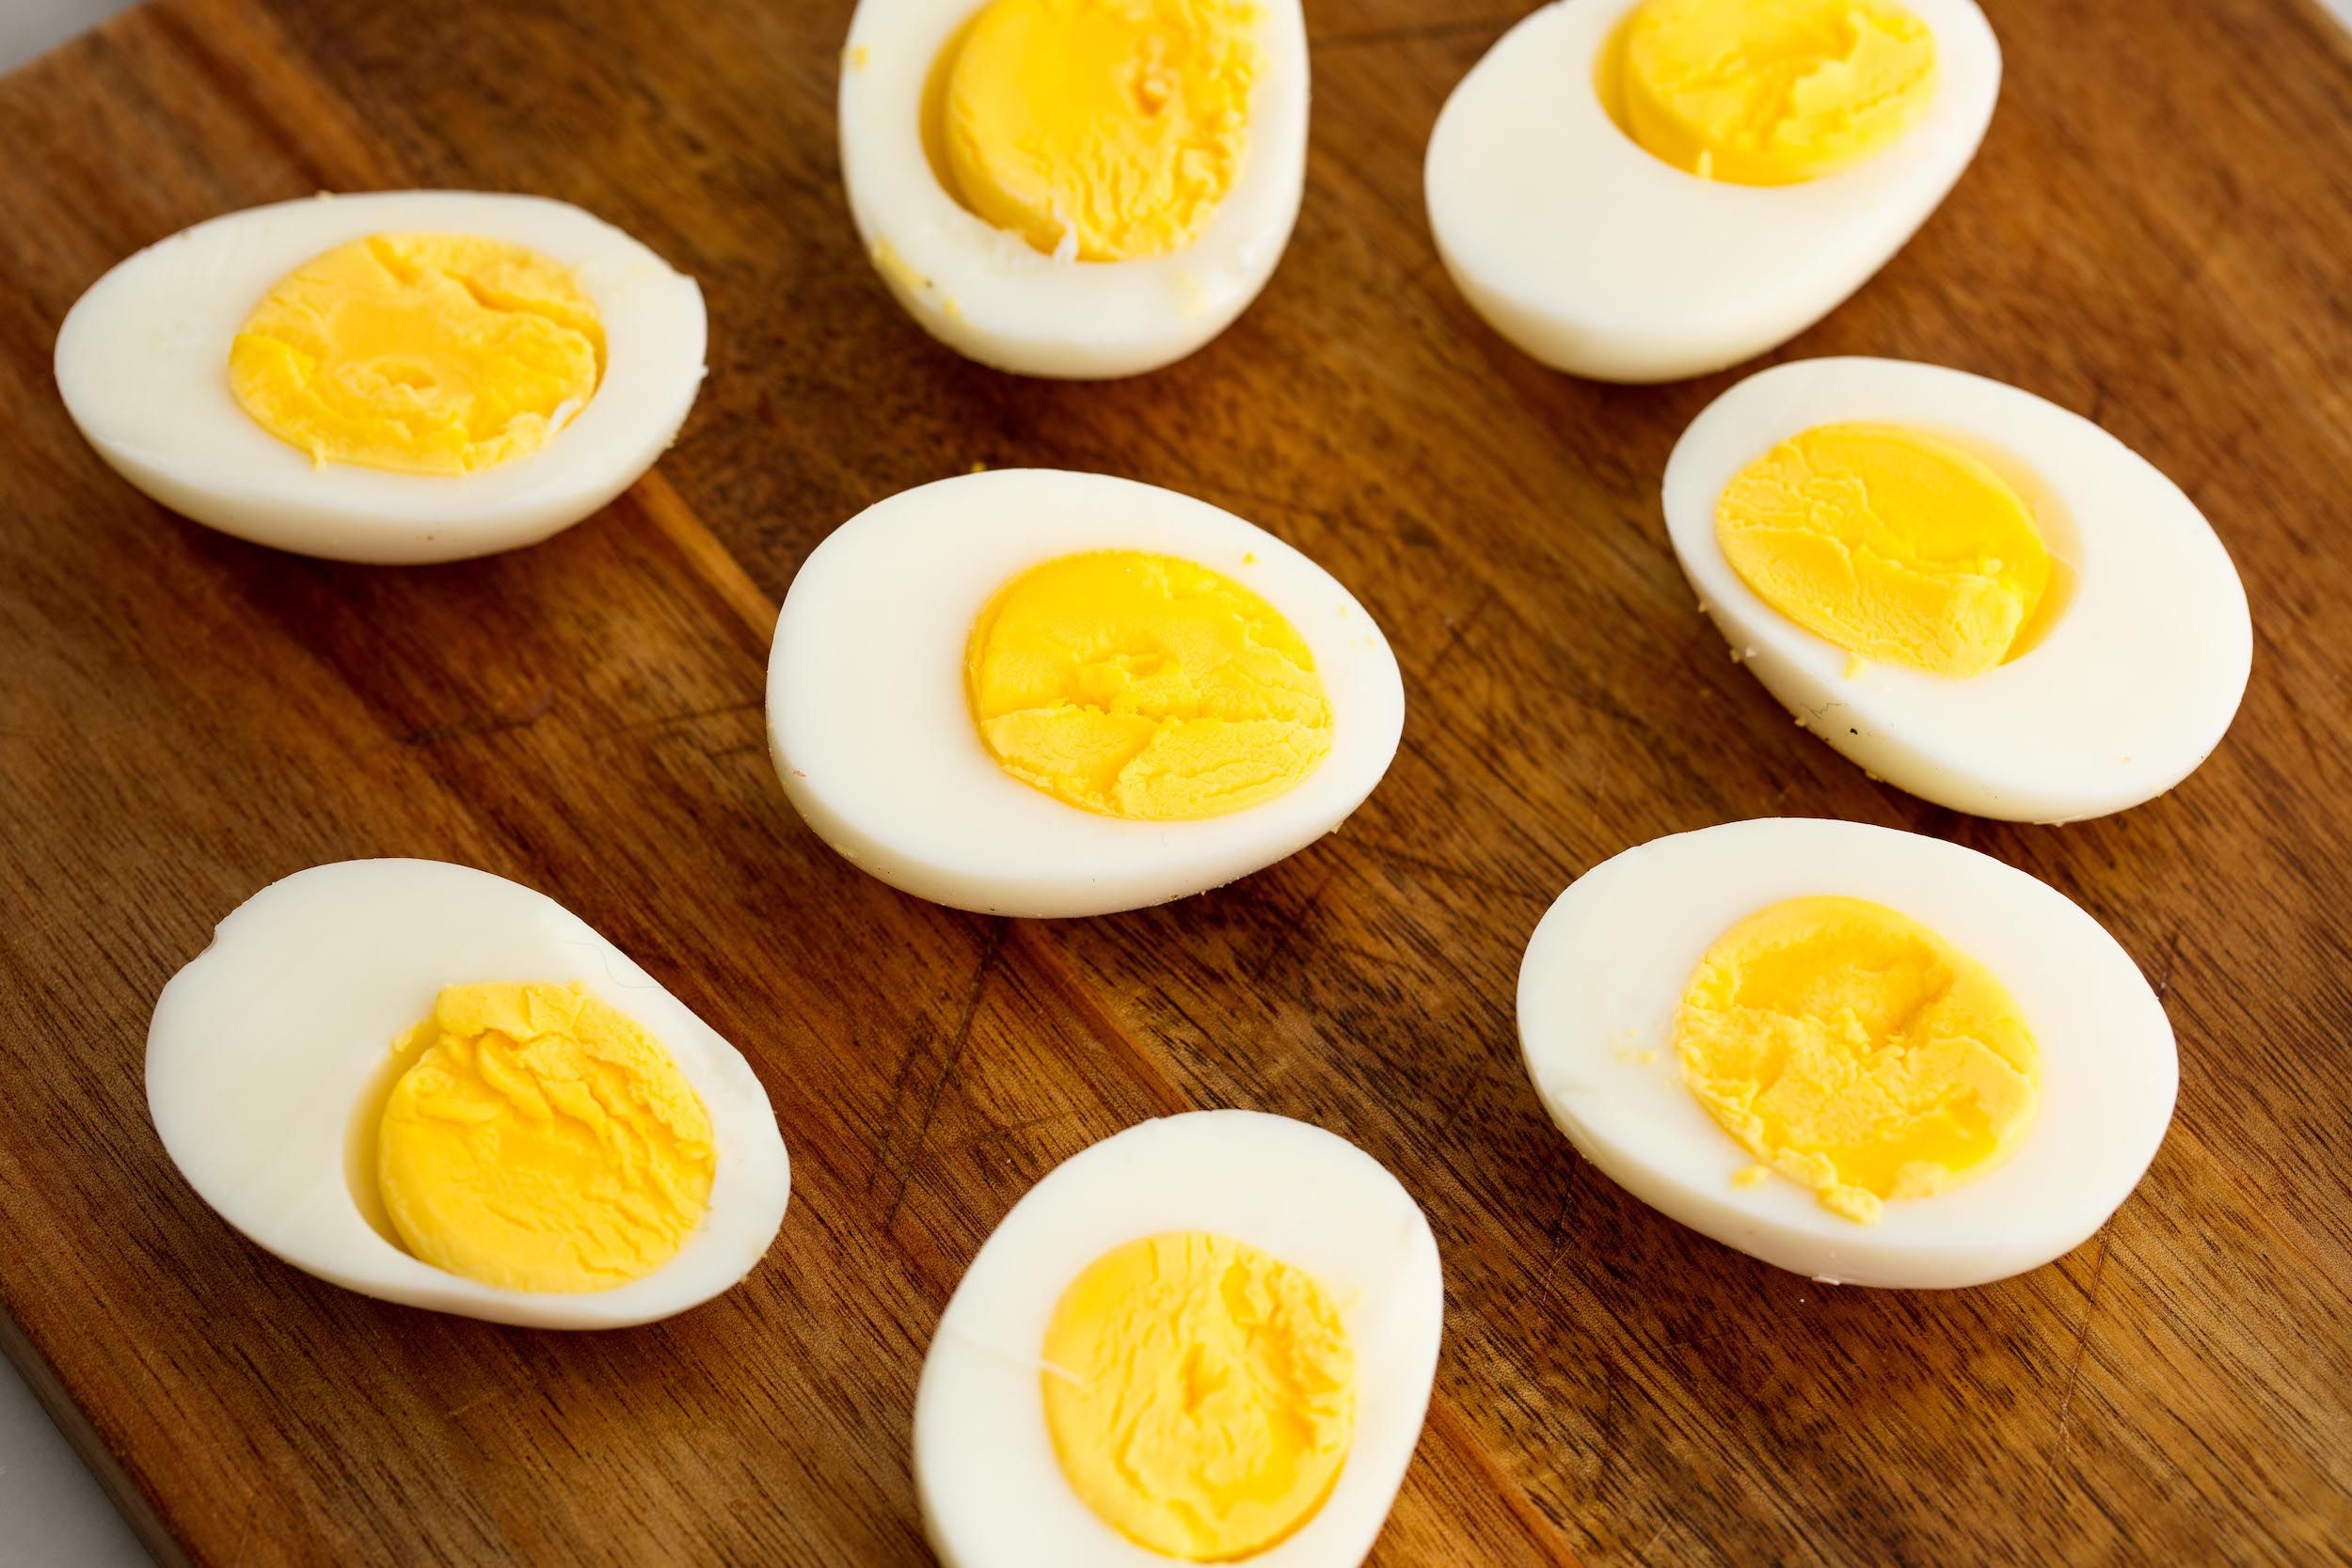 Healthy Foods to Lose Weight - Eggs